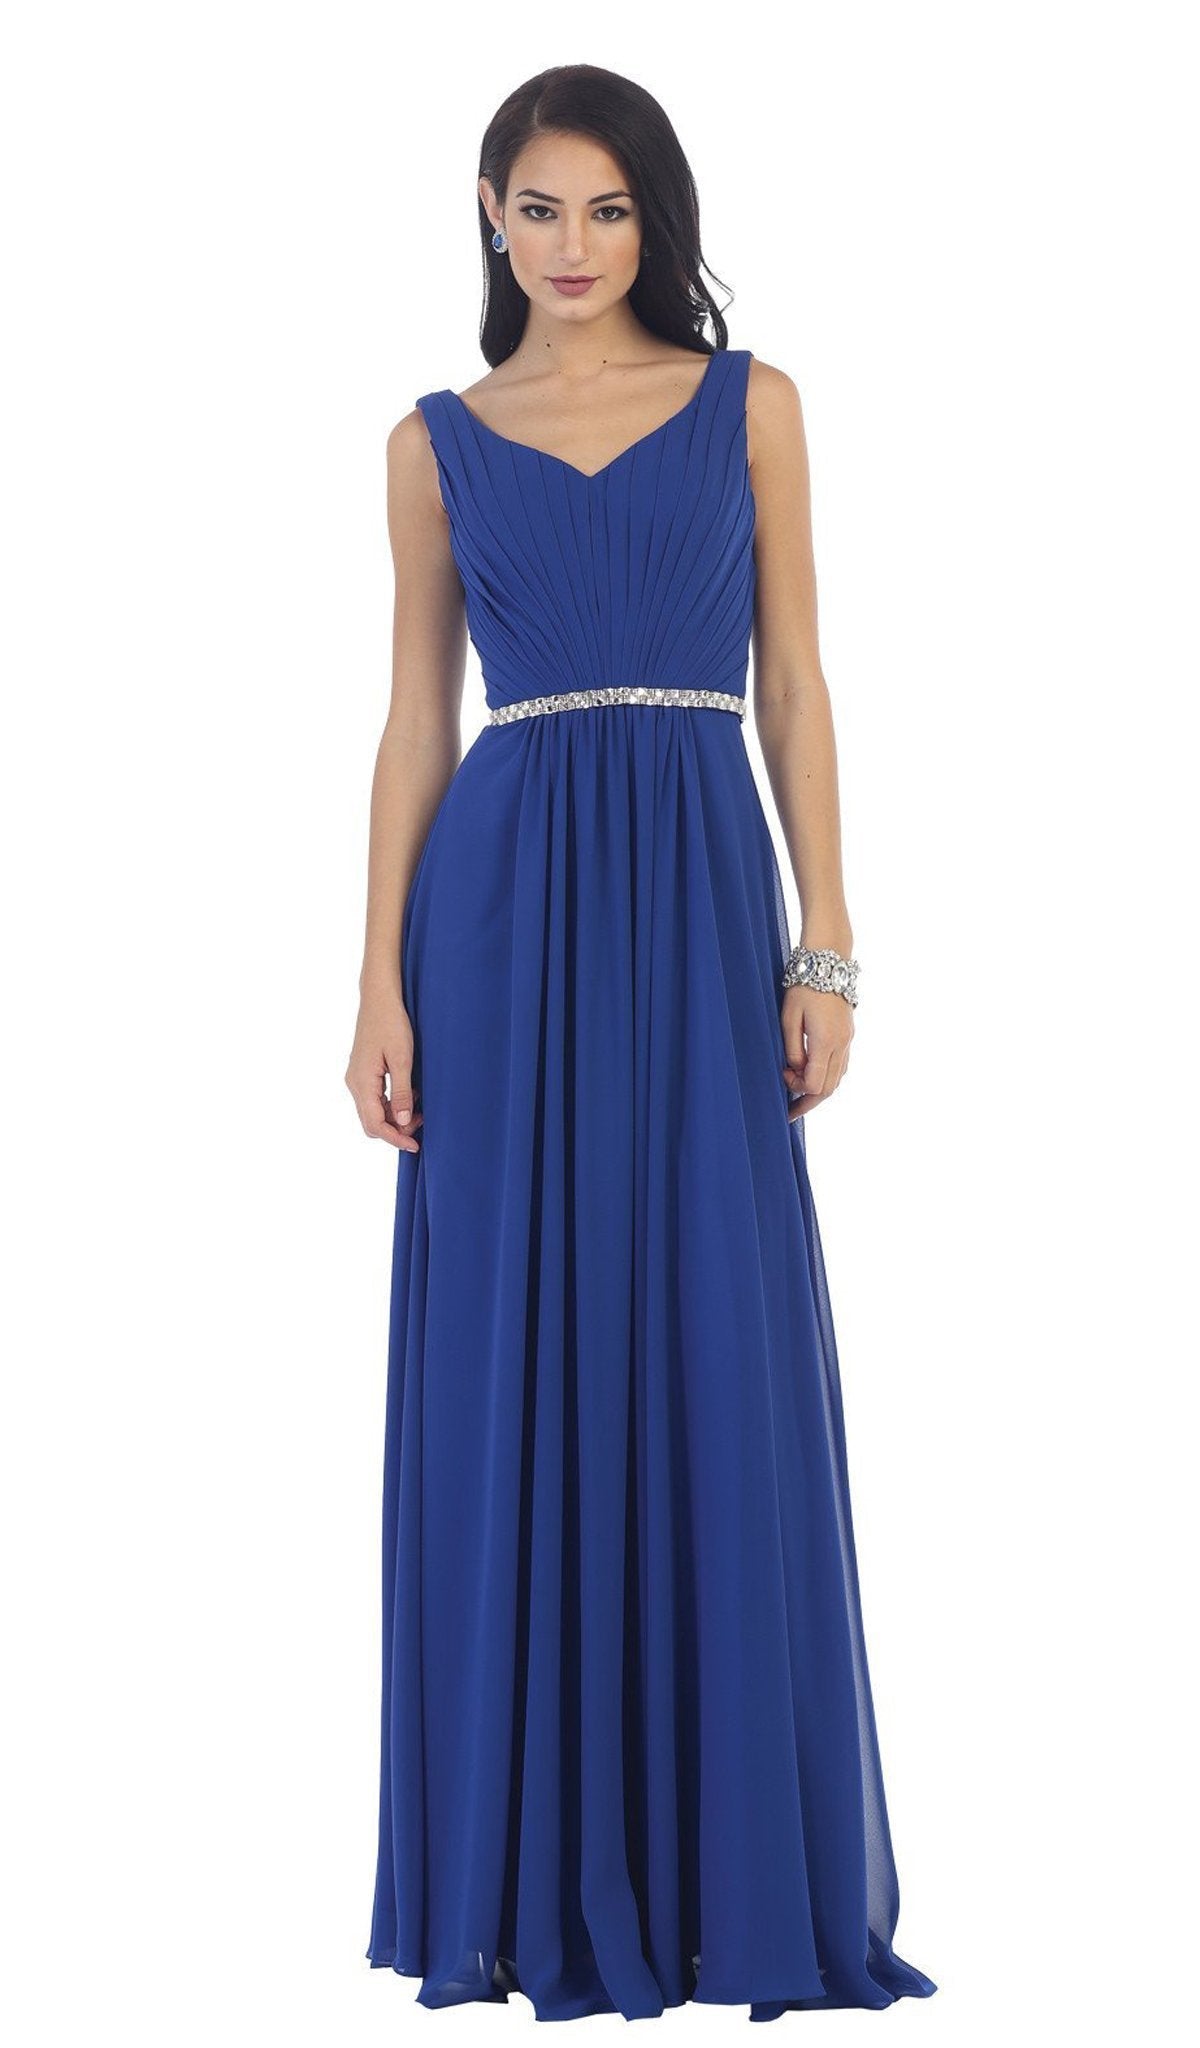 May Queen - Jeweled V-Neck Chiffon A-Line Prom Dress Special Occasion Dress 22 / Royal